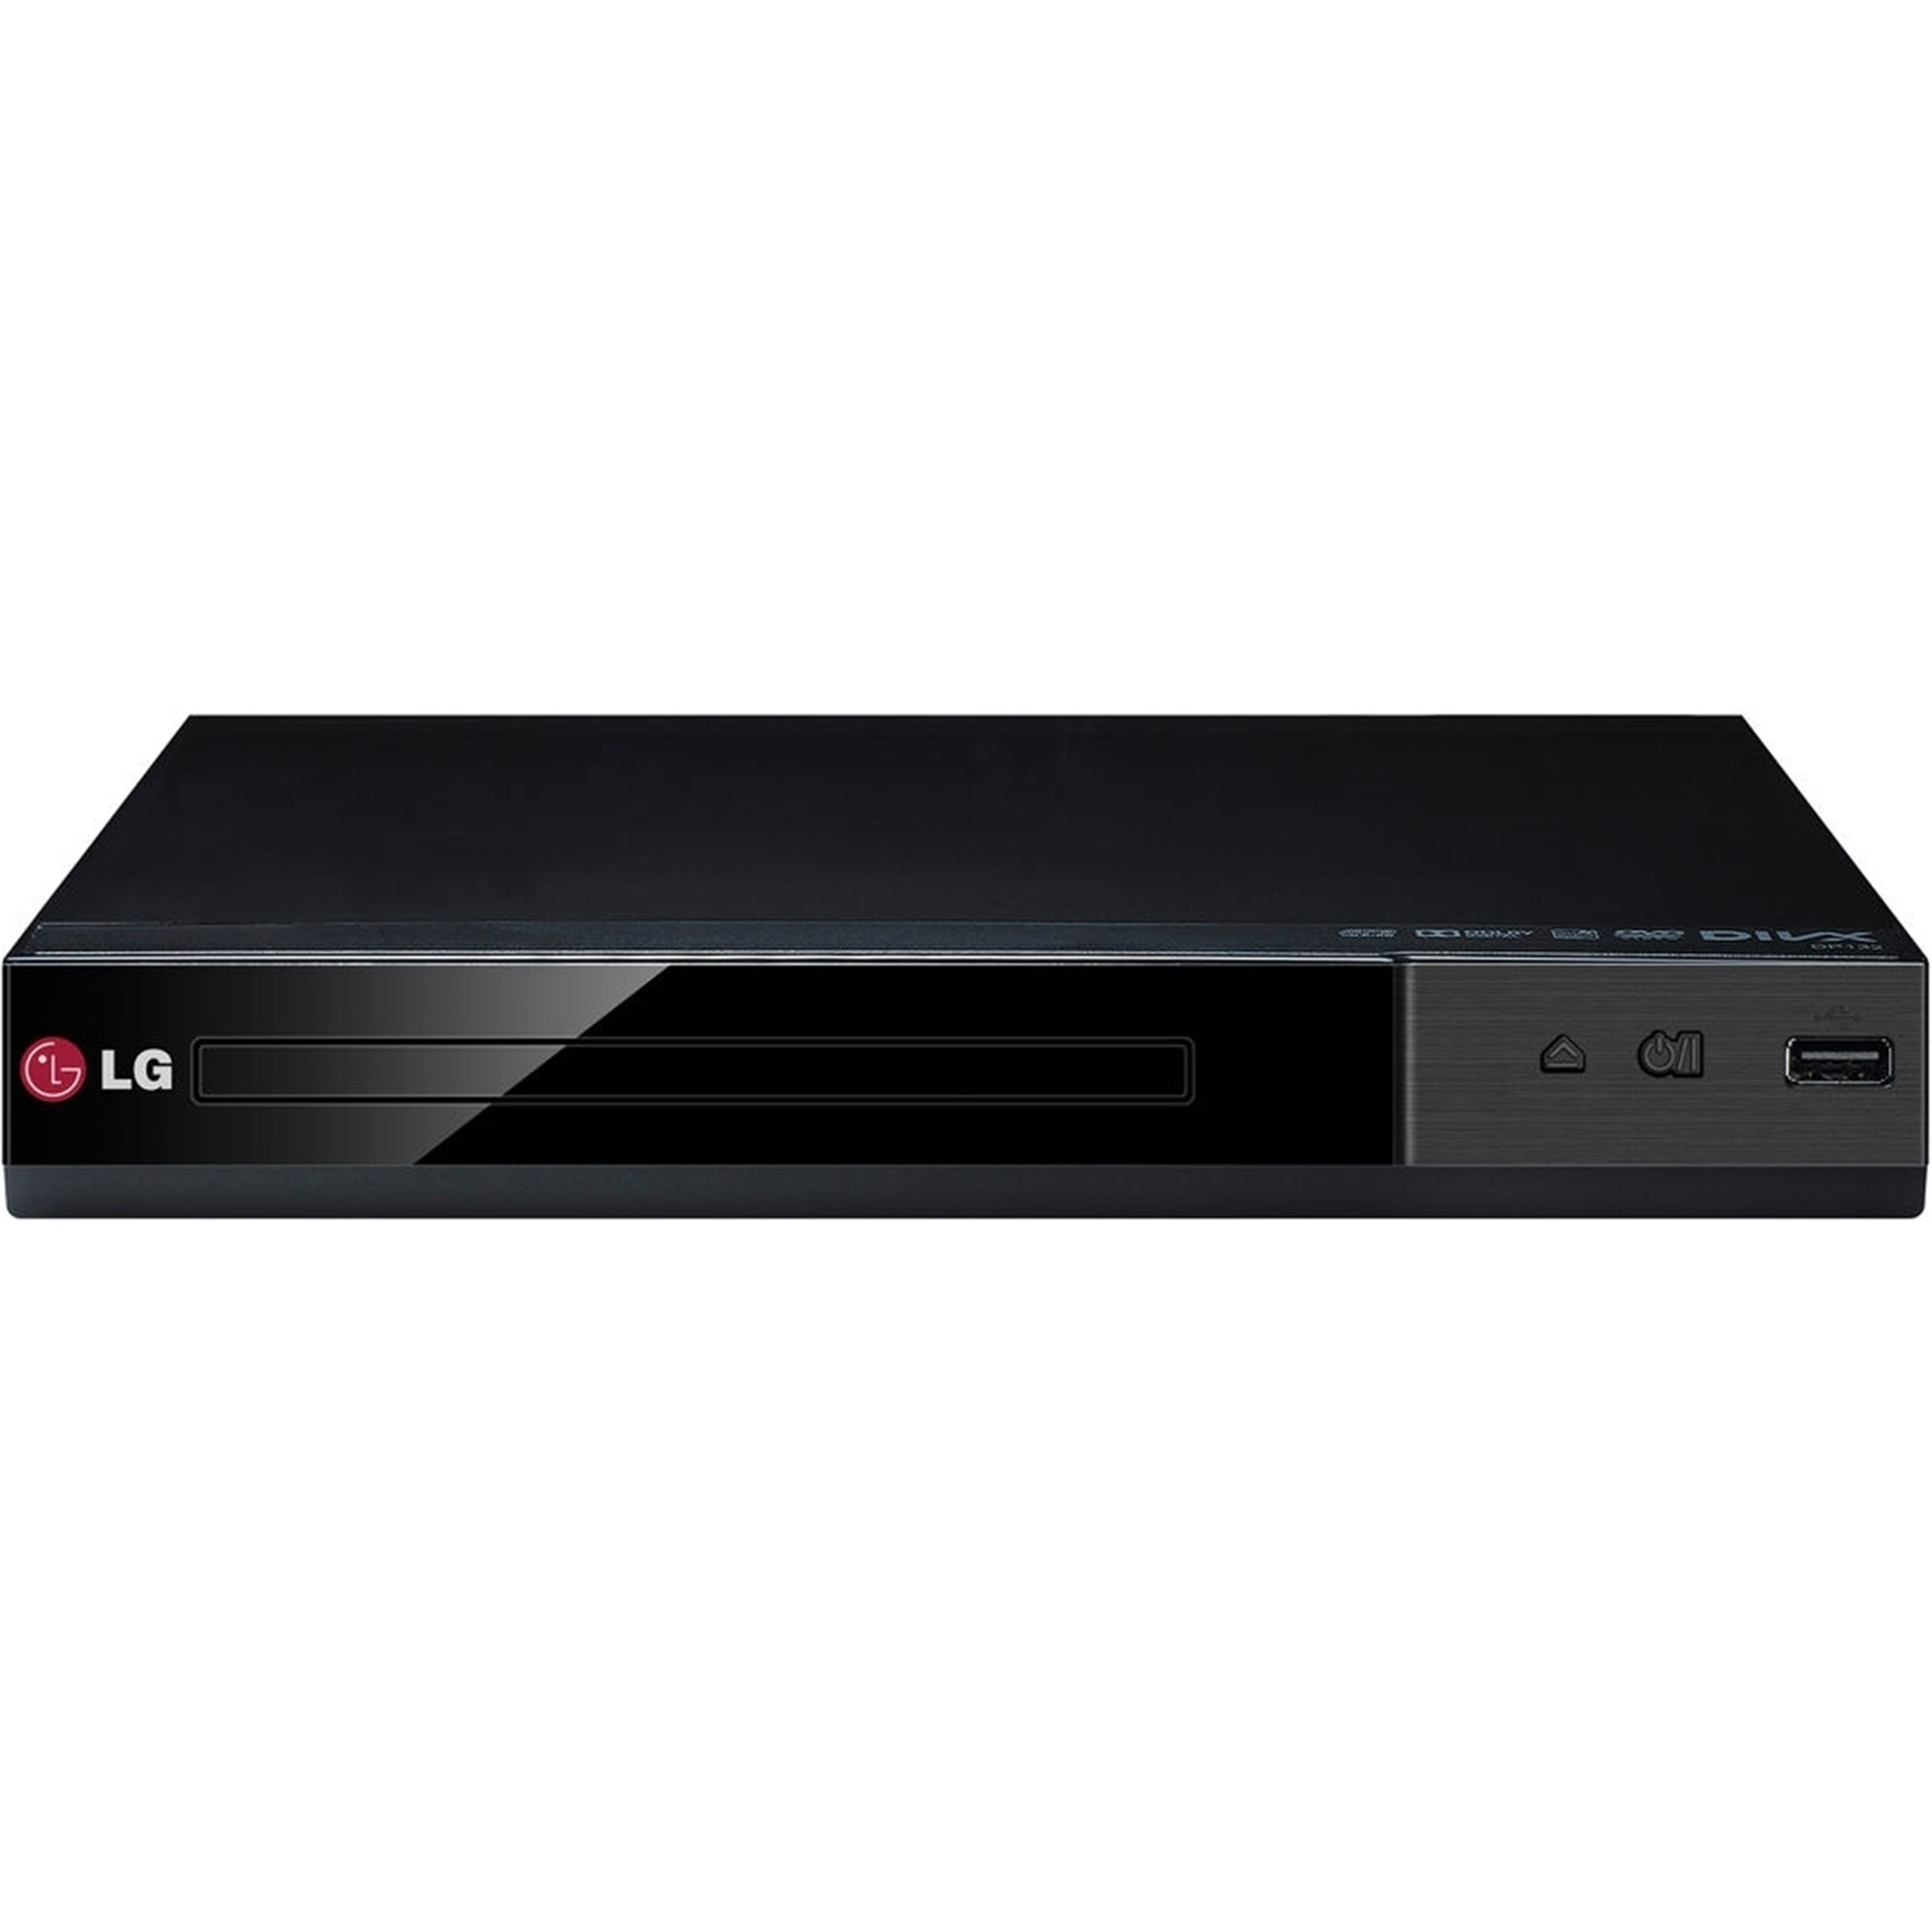 LG Electronics DP132 DVD Player (New Open Box) - 41.7 x 15.4 x 2.2 in.